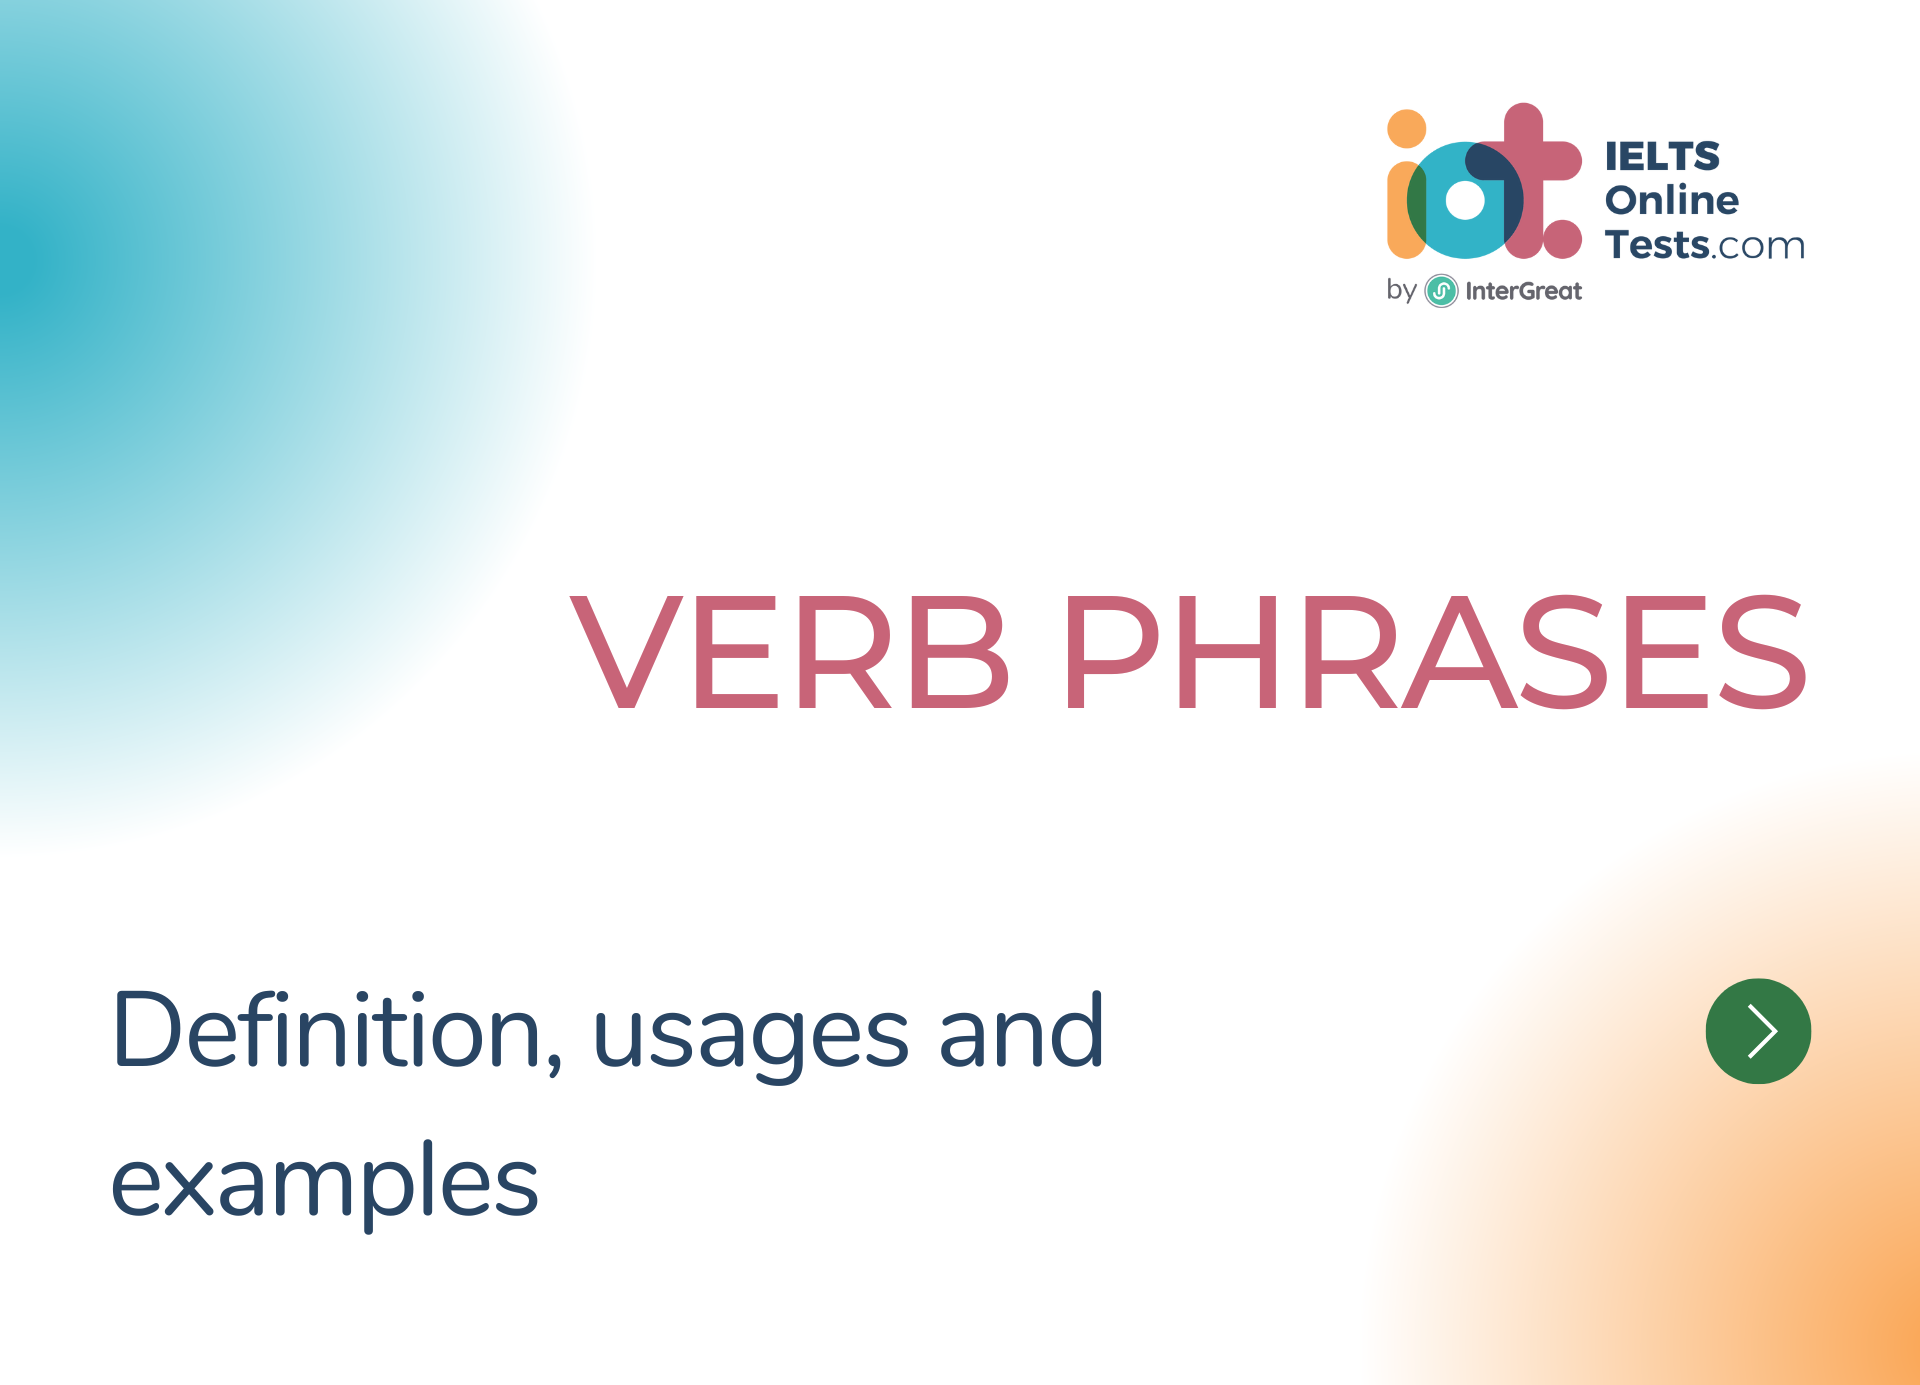 Verb phrase definition and examples